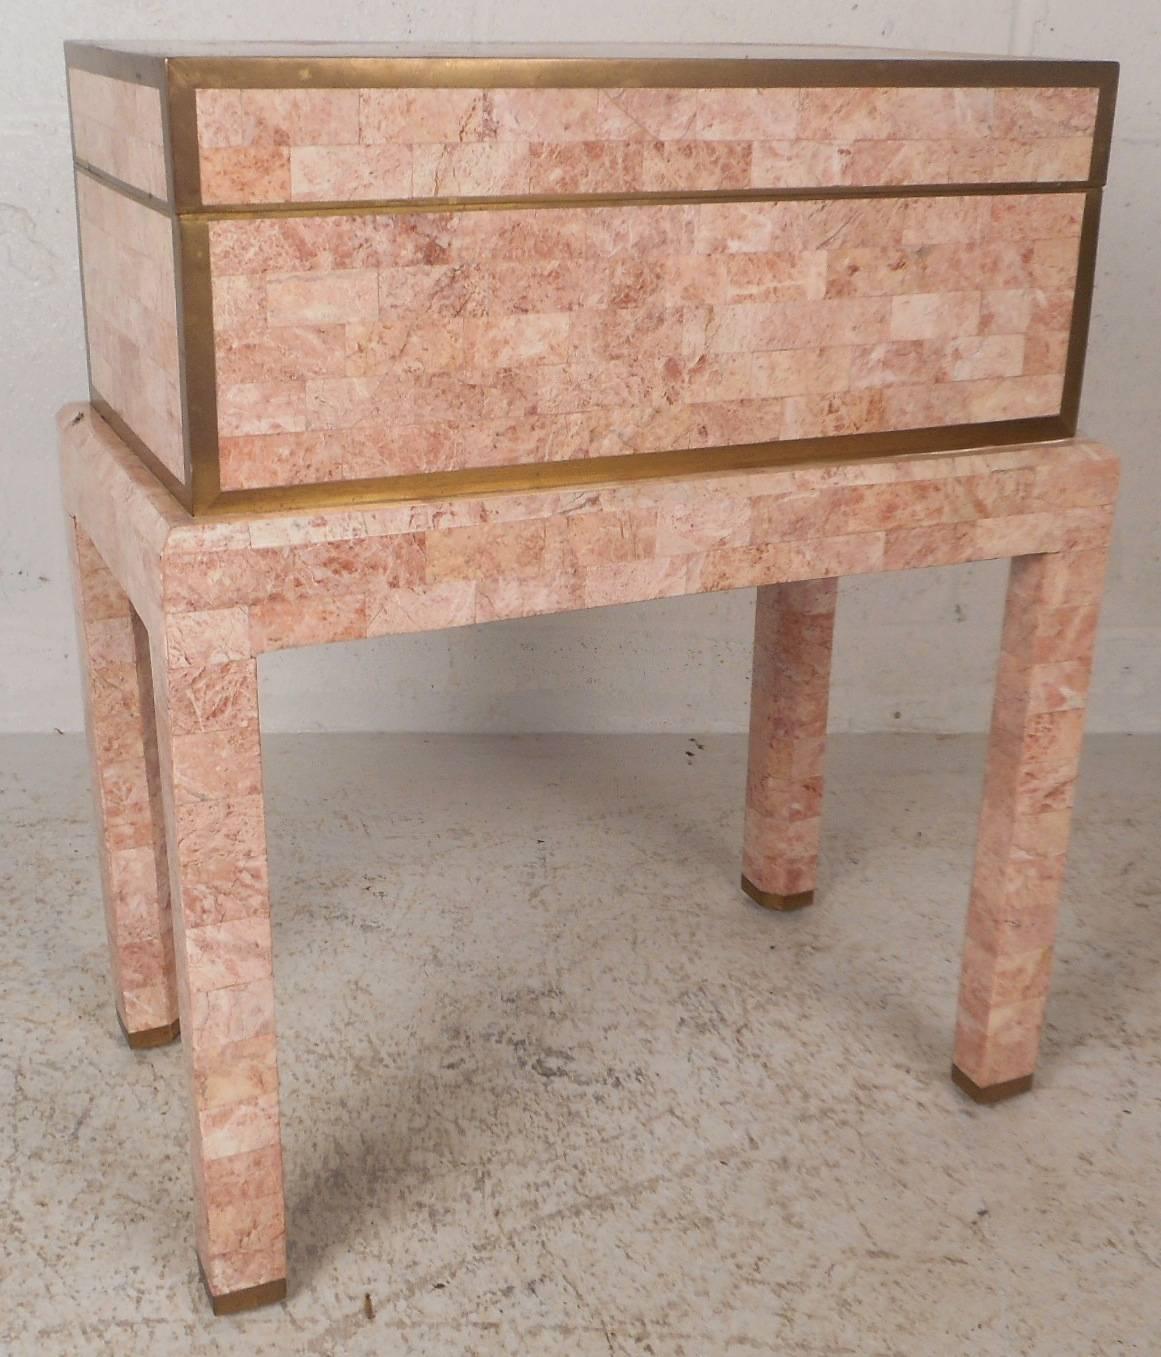 Elegant vintage modern box by Maitland-Smith is made of pink tessellated stone with brass inlay around the edges. Stylish design sits on top of four legs offering convenient access. The unique design has a top that opens up to a gorgeous wood grain